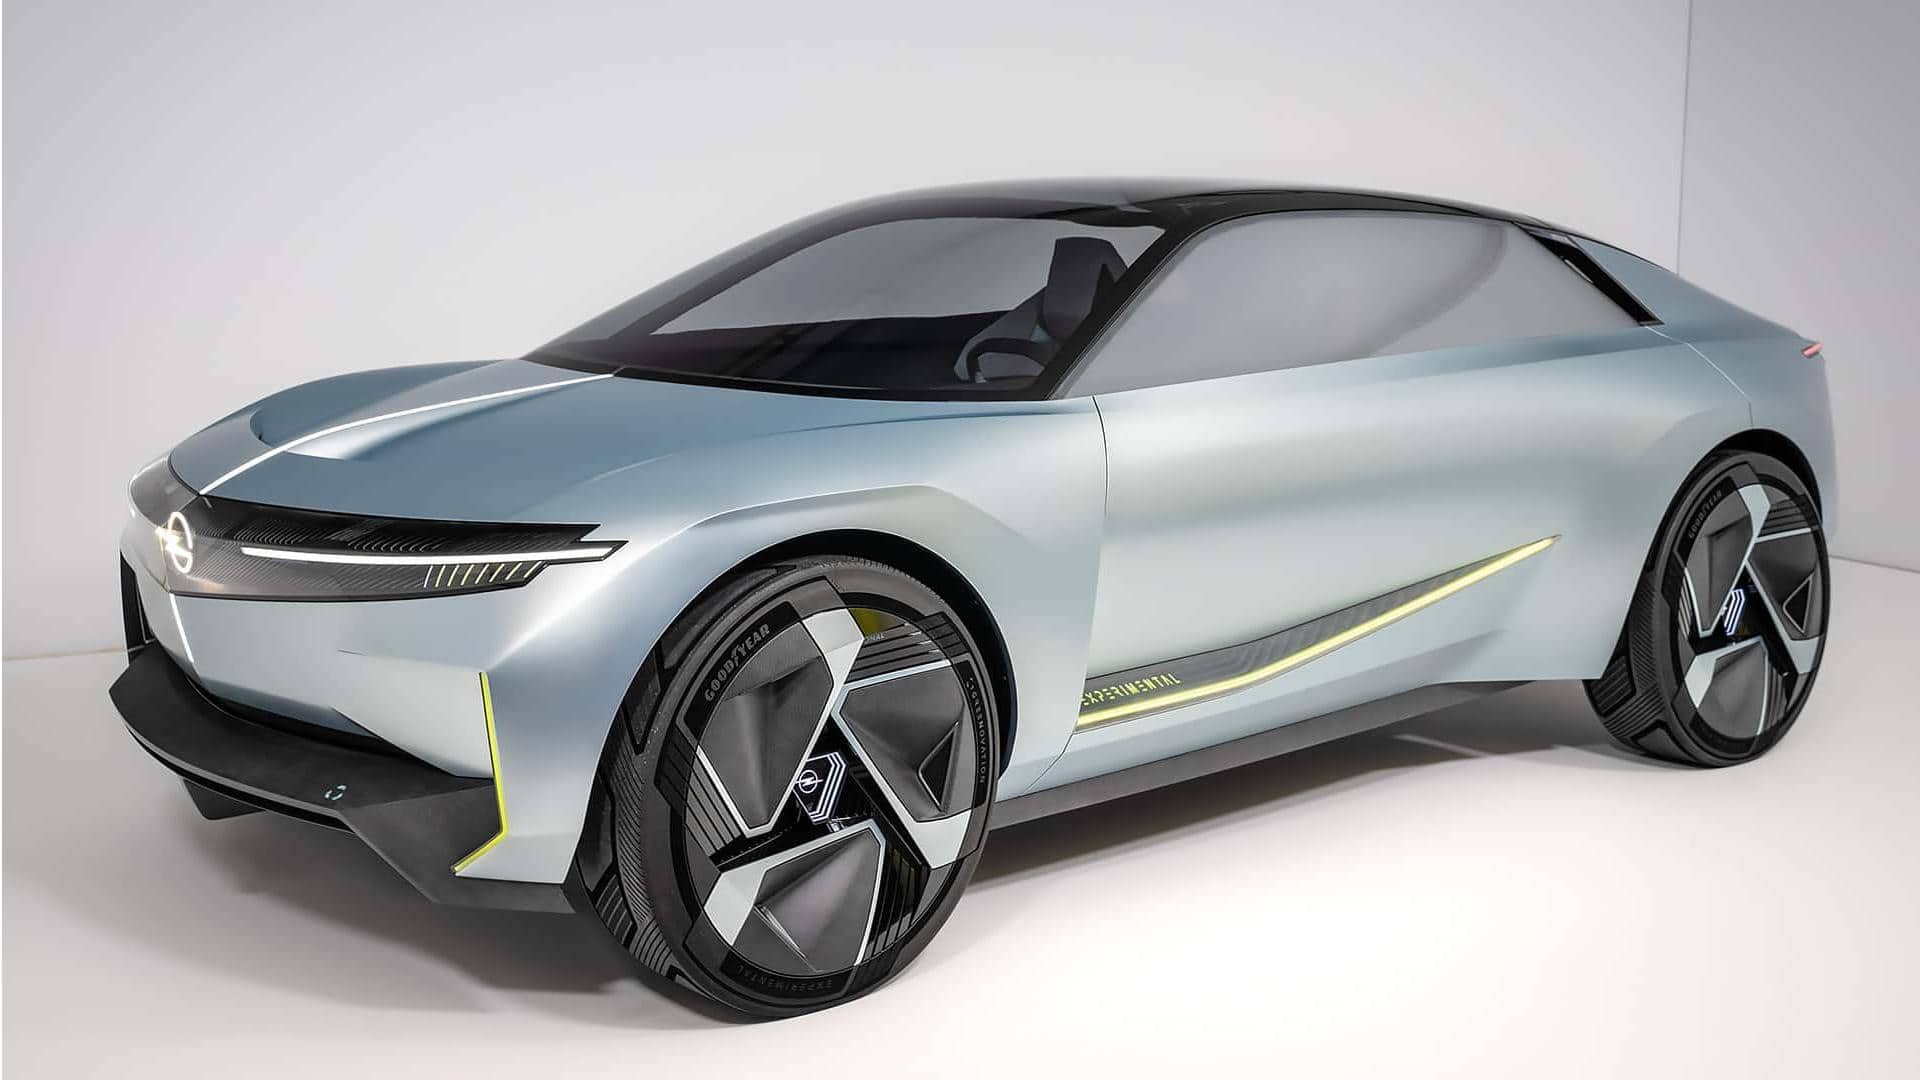 Opel unveils Experimental concept as a glimpse of future mobility